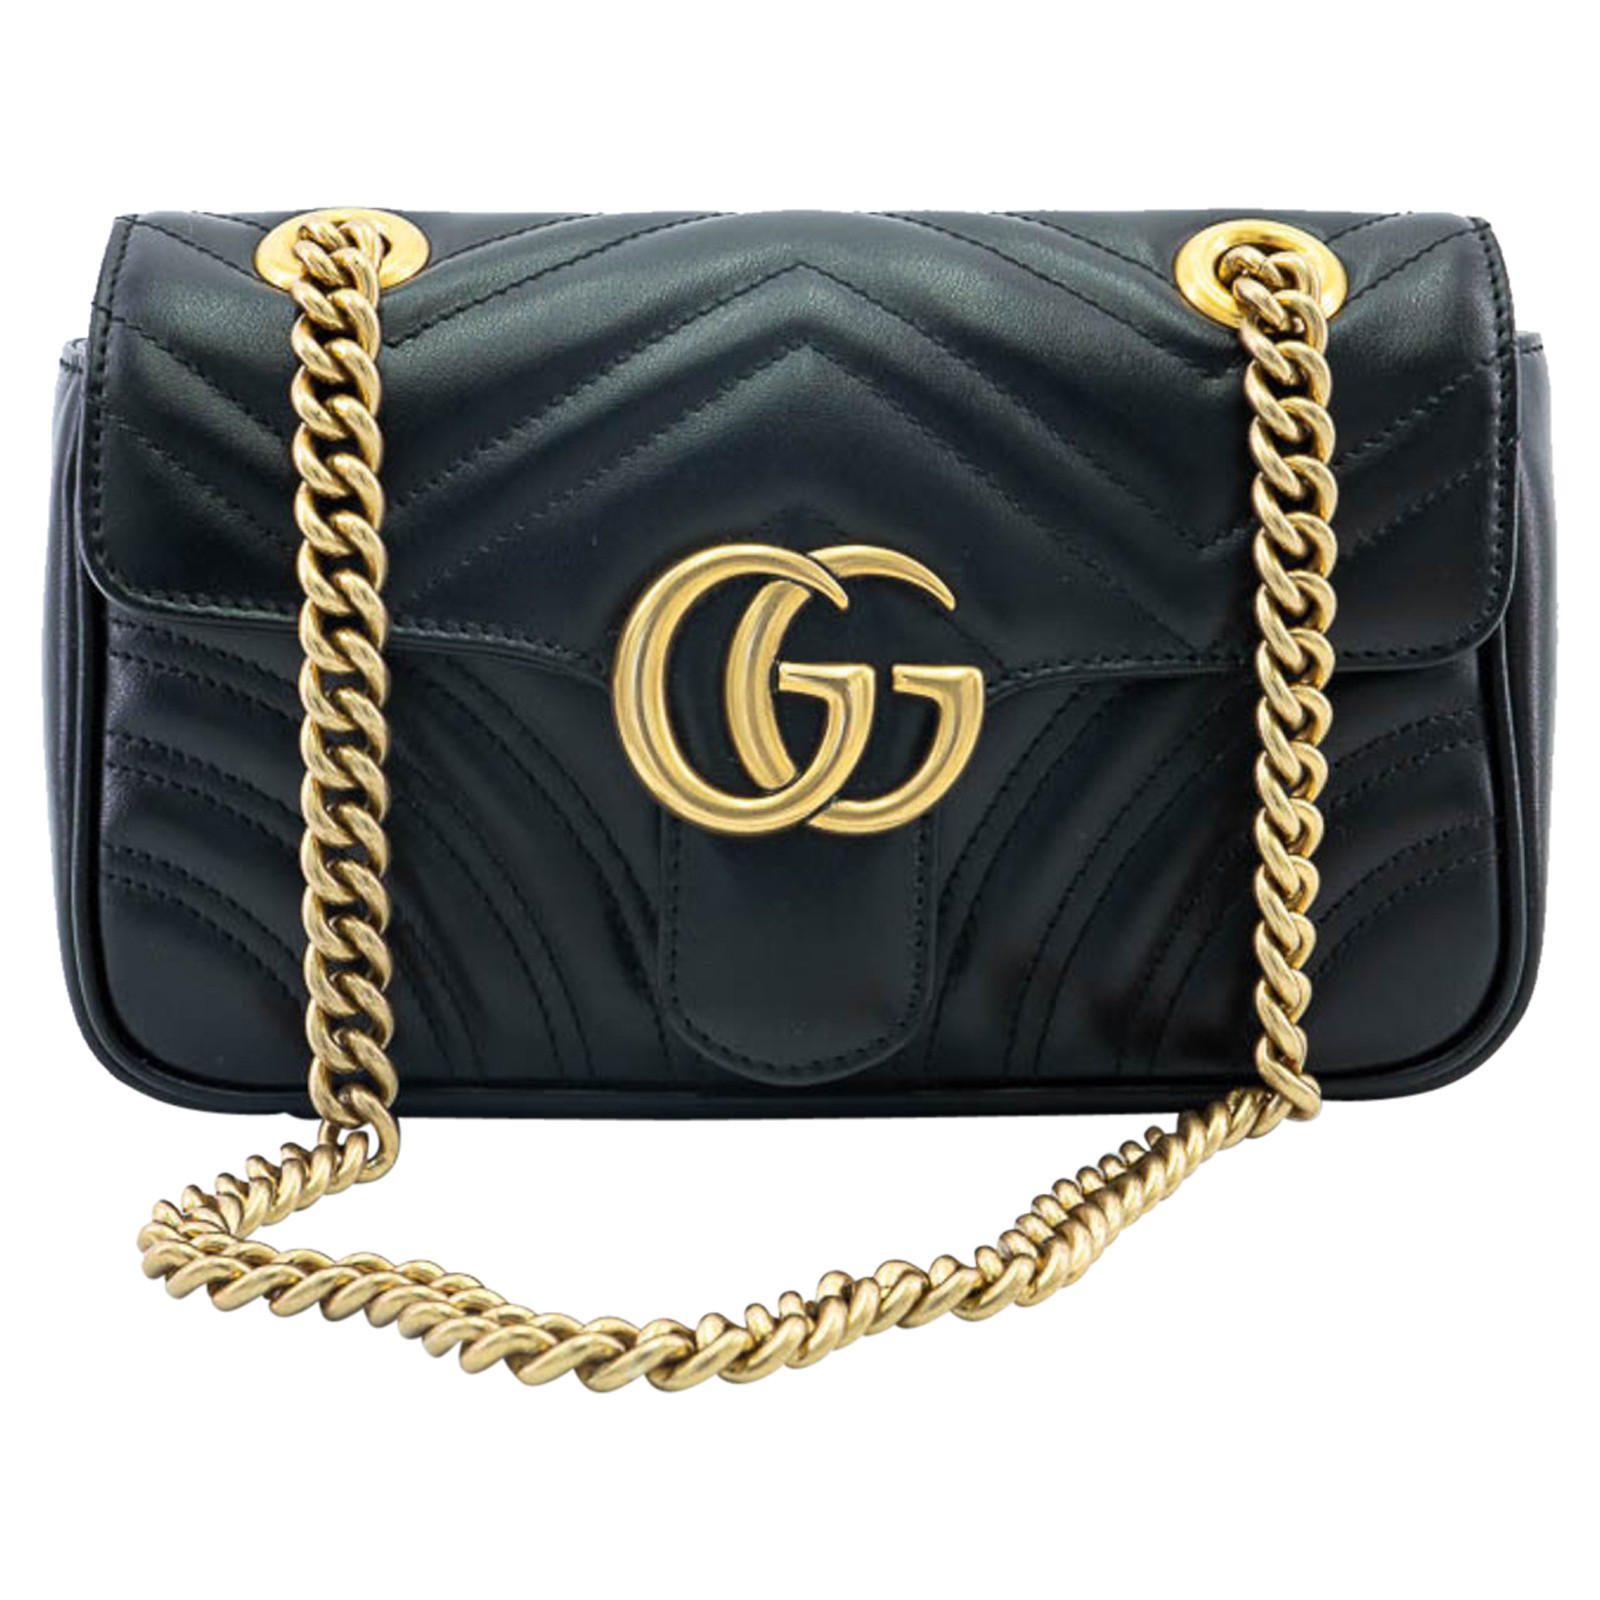 Gucci GG Marmont Flap Normal Leather in Black - Second Hand Gucci GG Marmont Flap Bag Normal Leather in Black buy 1400€ (6282216)